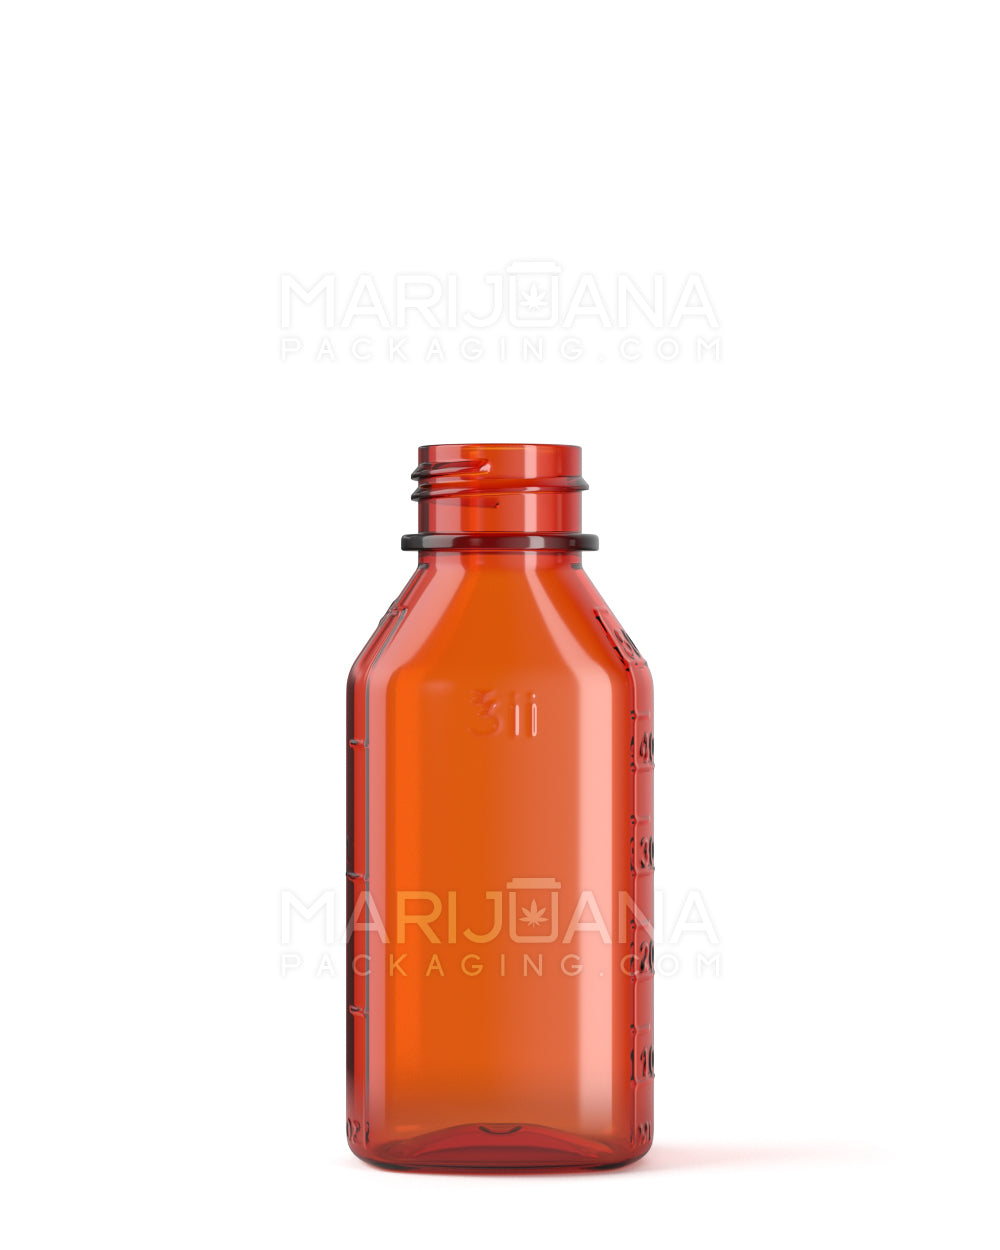 Child Resistant | Push Down & Turn Plastic Syrup Bottles | 2oz - Amber - 200 Count - 5